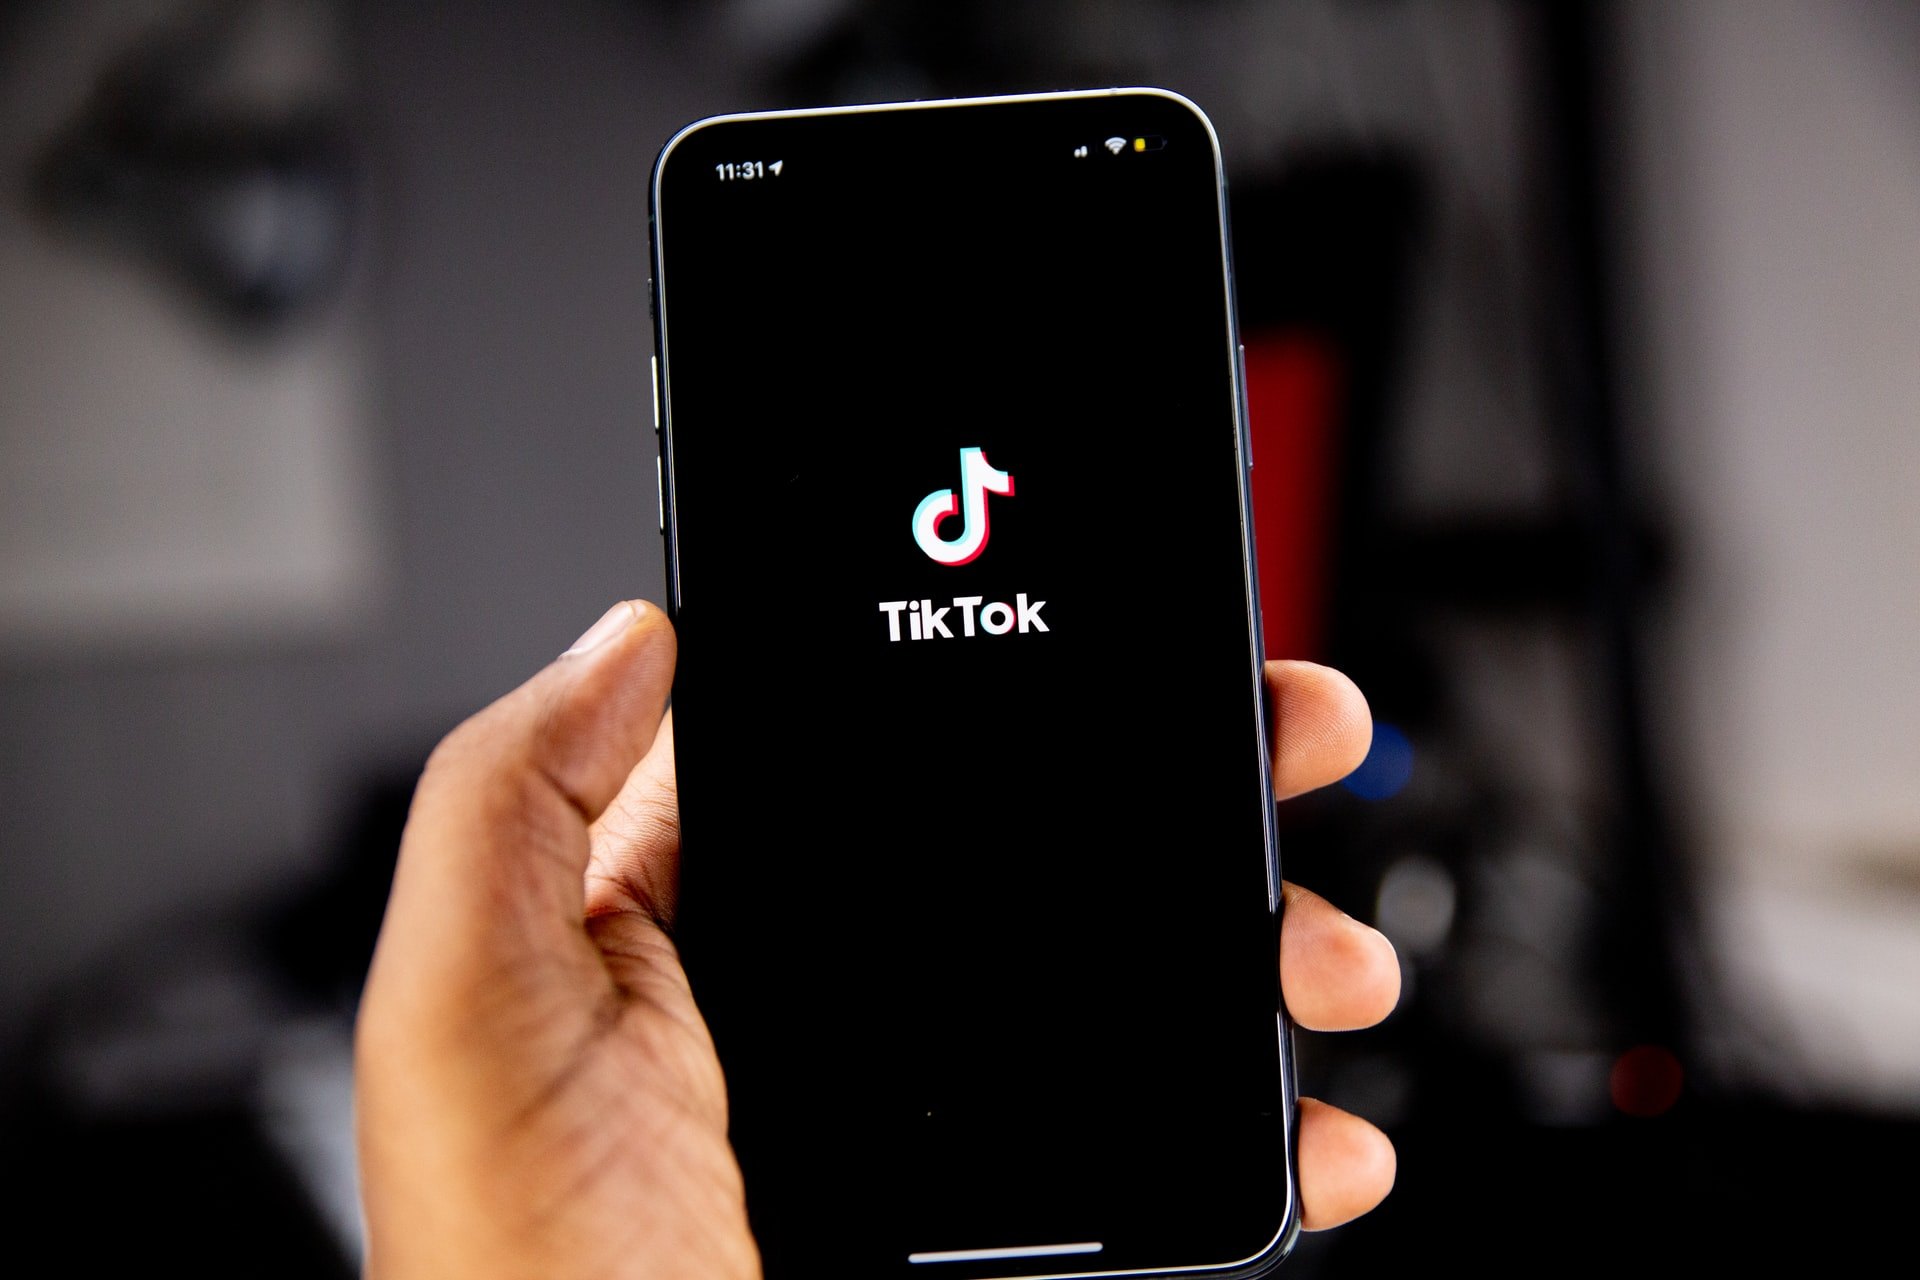 TikTok's Top 20 Most Played Songs – Discover Them Here